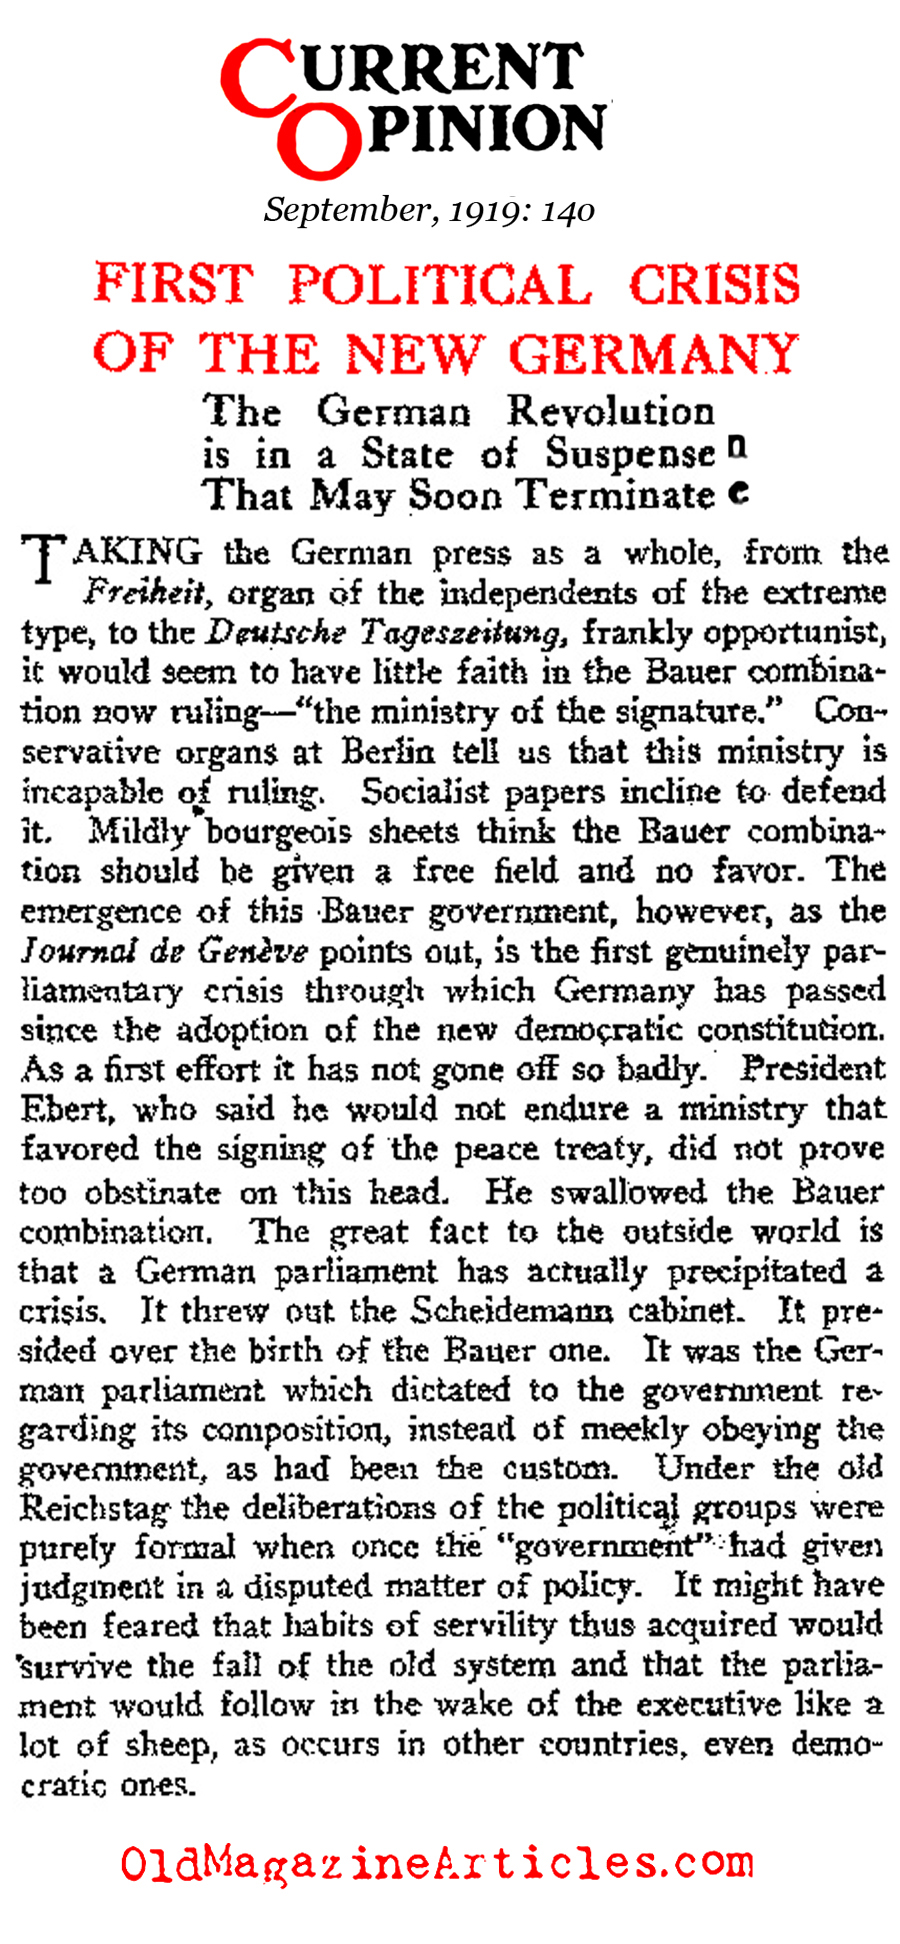 The Political Crisis in Post-War Germany (Current Opinion Magazine, 1919)